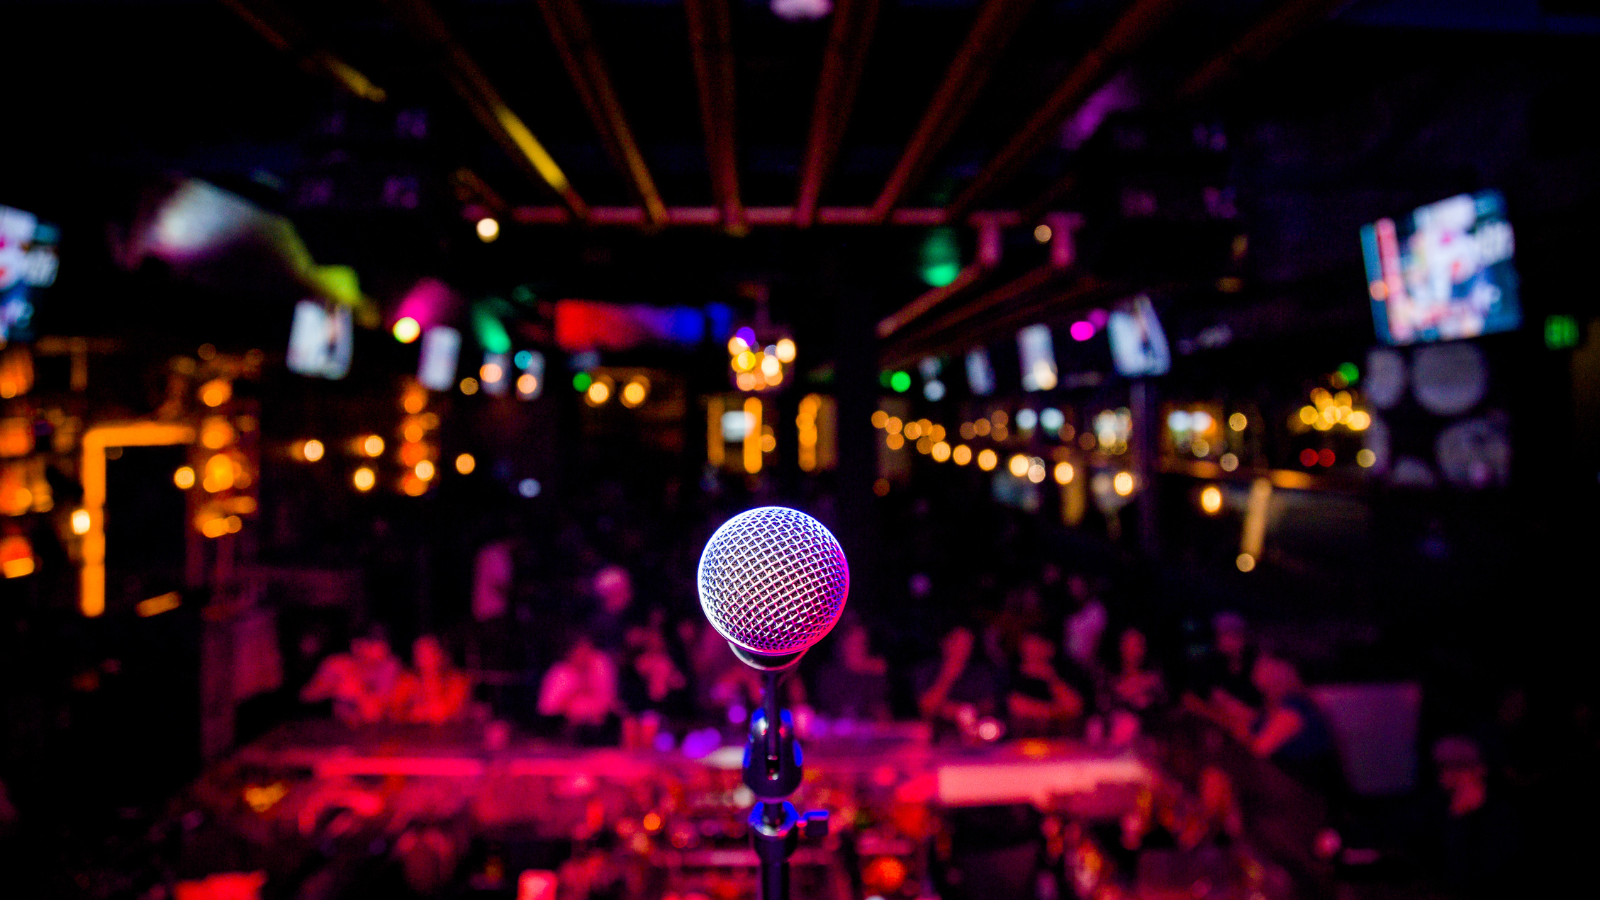 Microphone at a Comedy Show or Music Performance Show on Stage Entertainment